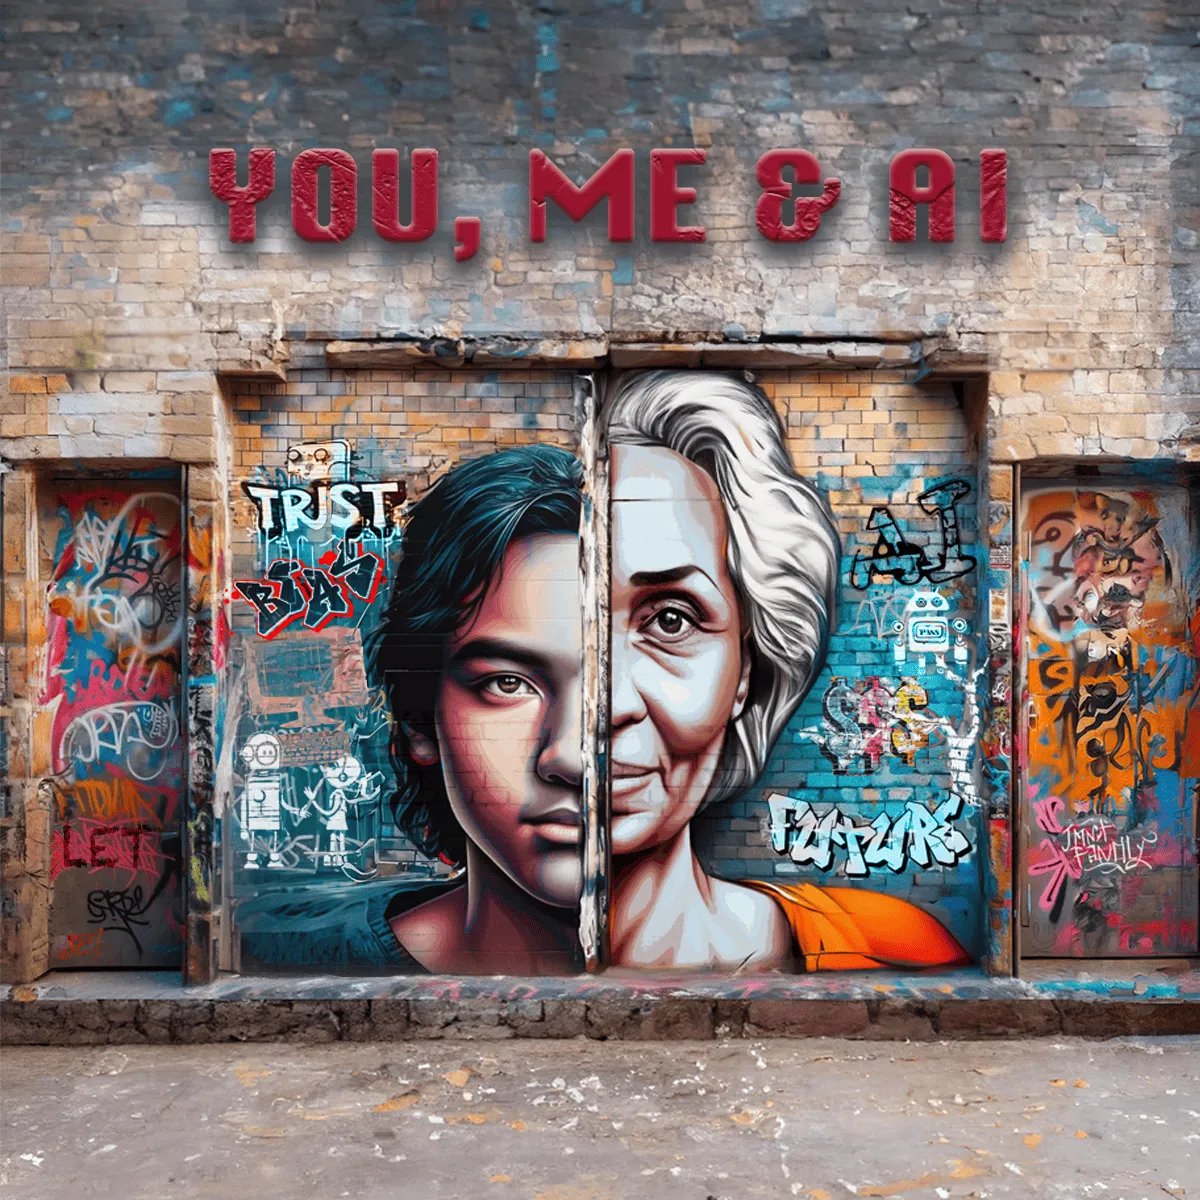 ‘You, Me & AI’ workshop will be offered May 22